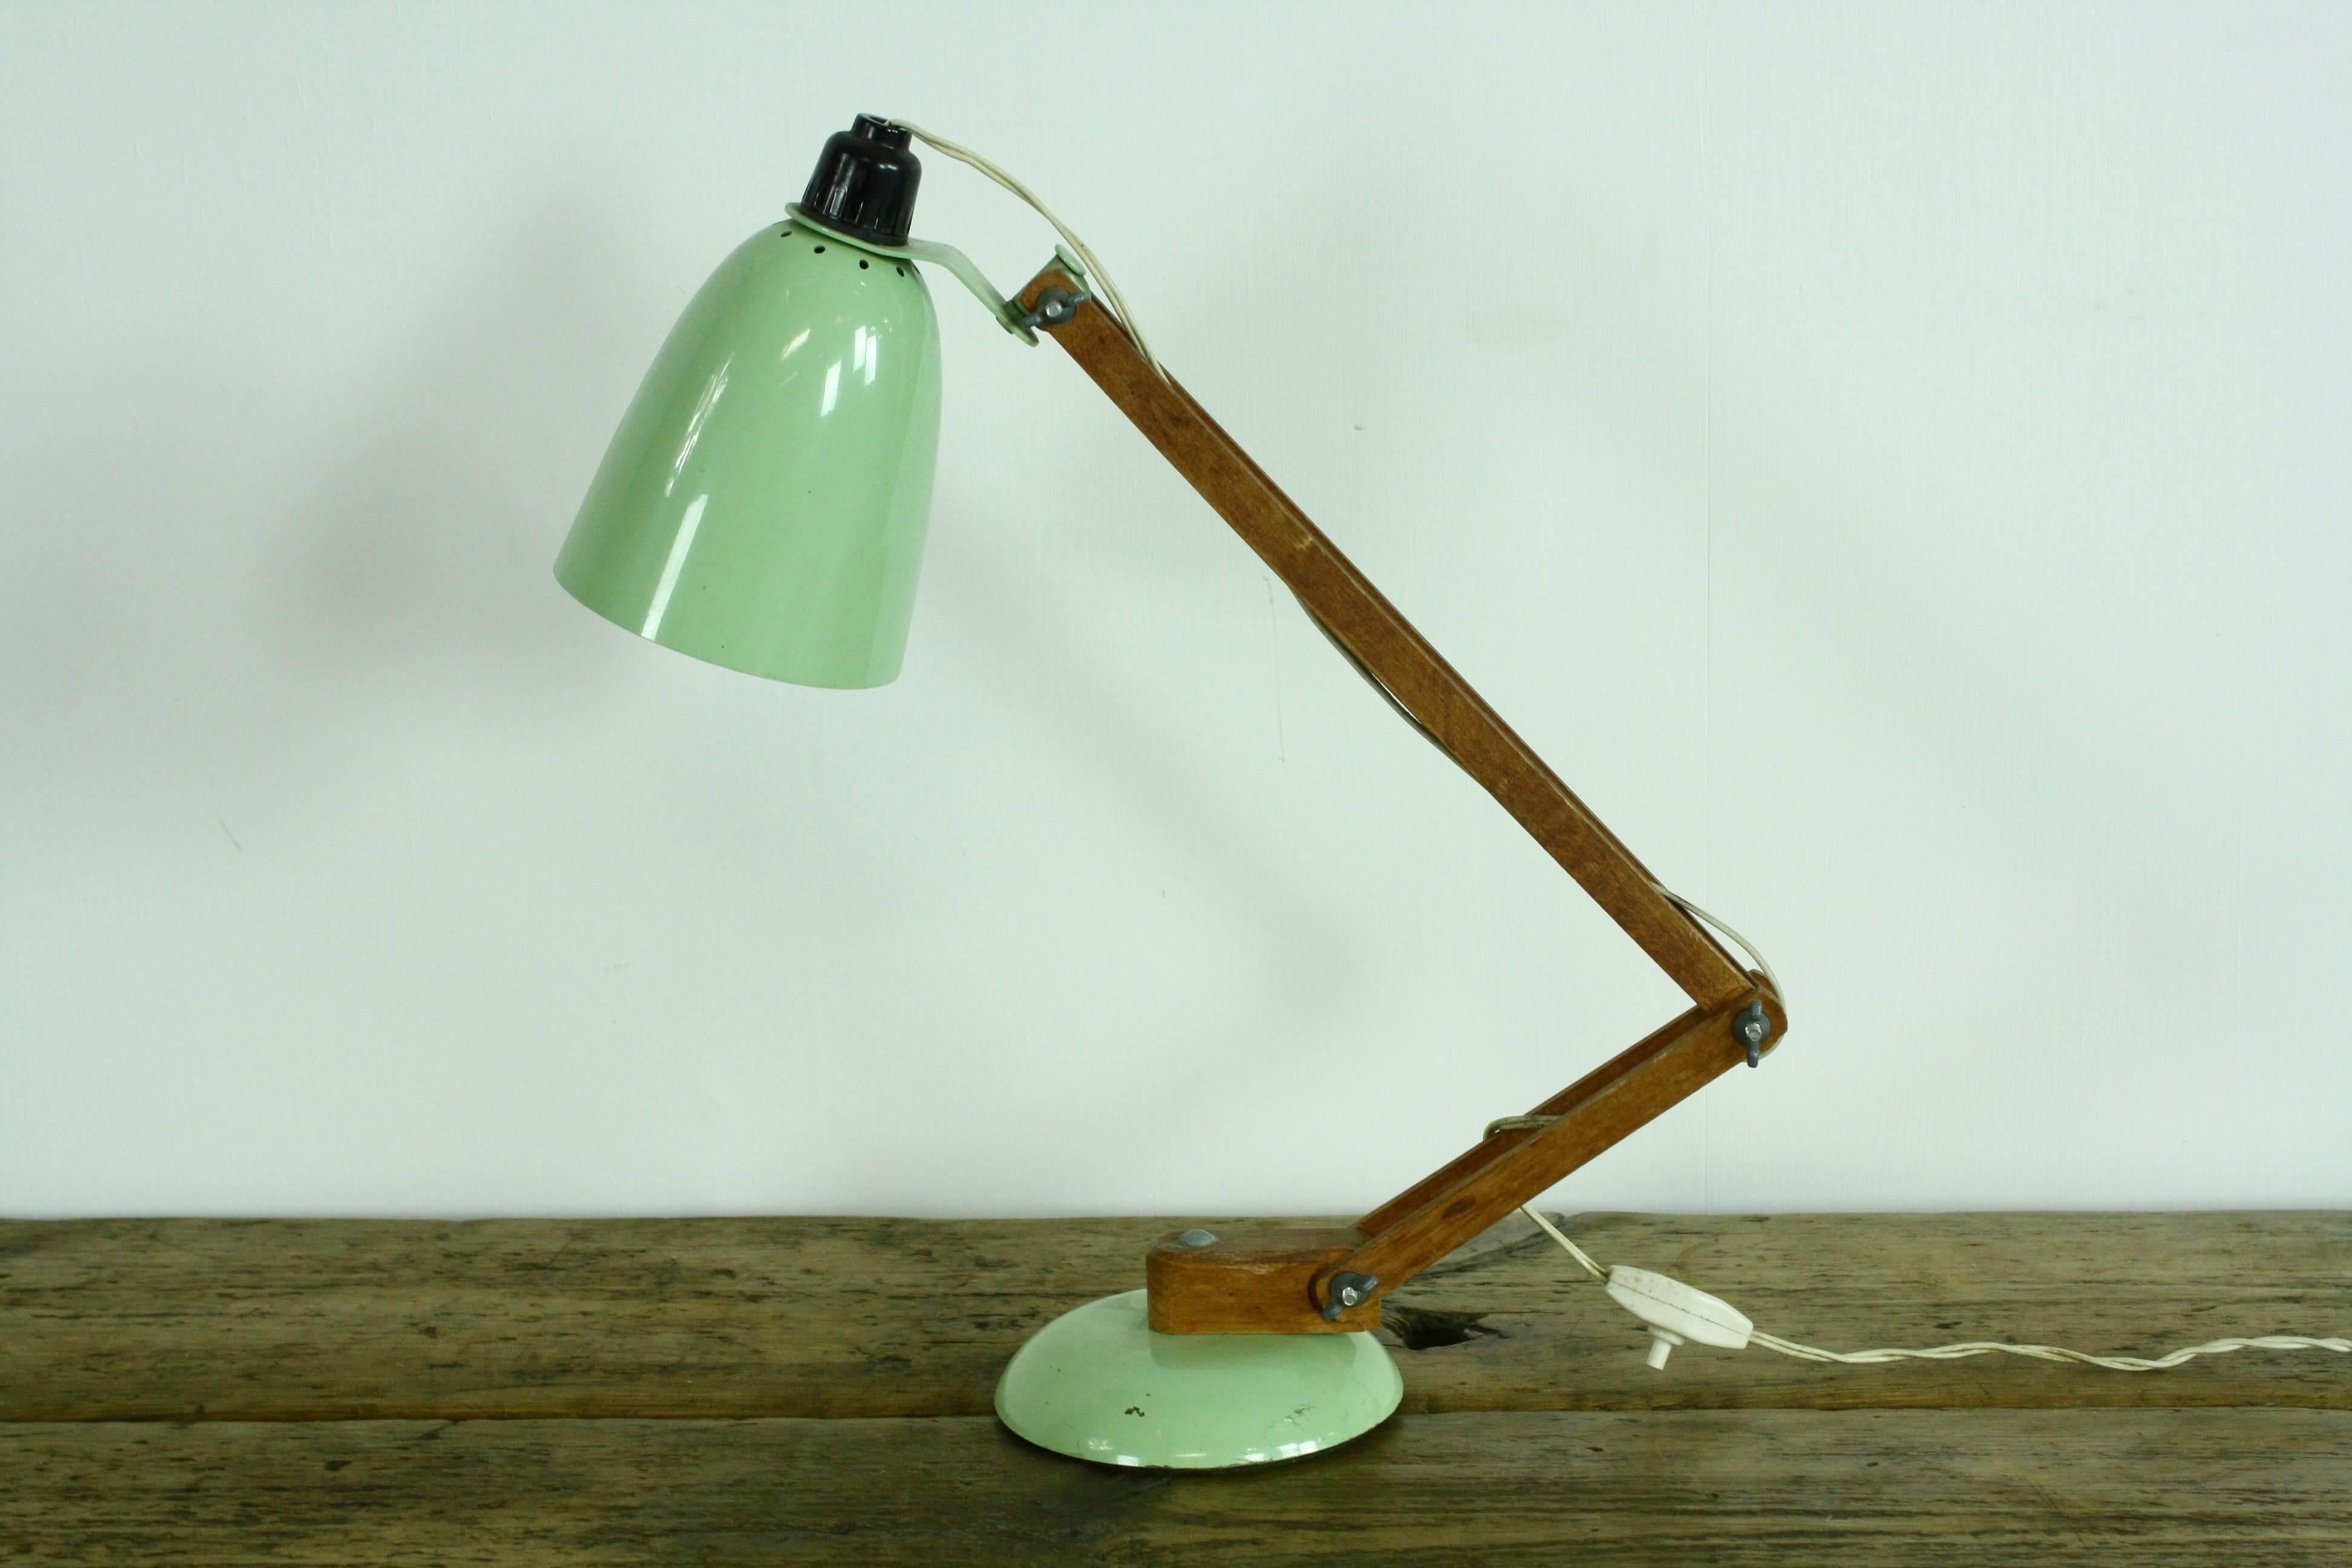 Vintage Midcentury Maclamp Anglepoise Lamp in Green Designed by Terence Conran In Good Condition For Sale In Lewes, East Sussex